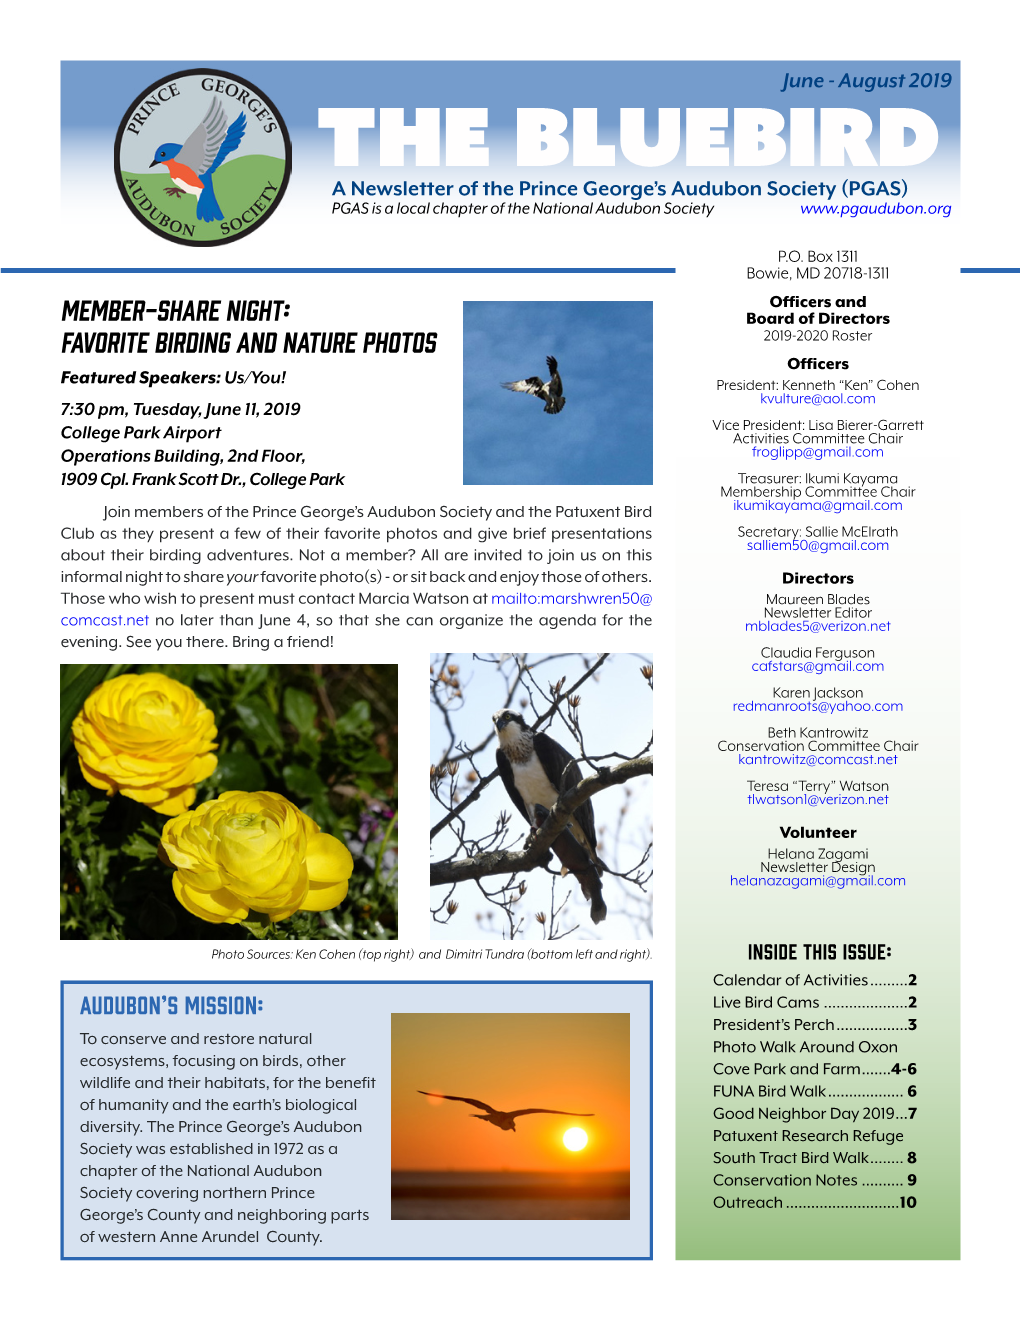 The Bluebird a Newsletter of the Prince George’S Audubon Society (PGAS) PGAS Is a Local Chapter of the National Audubon Society